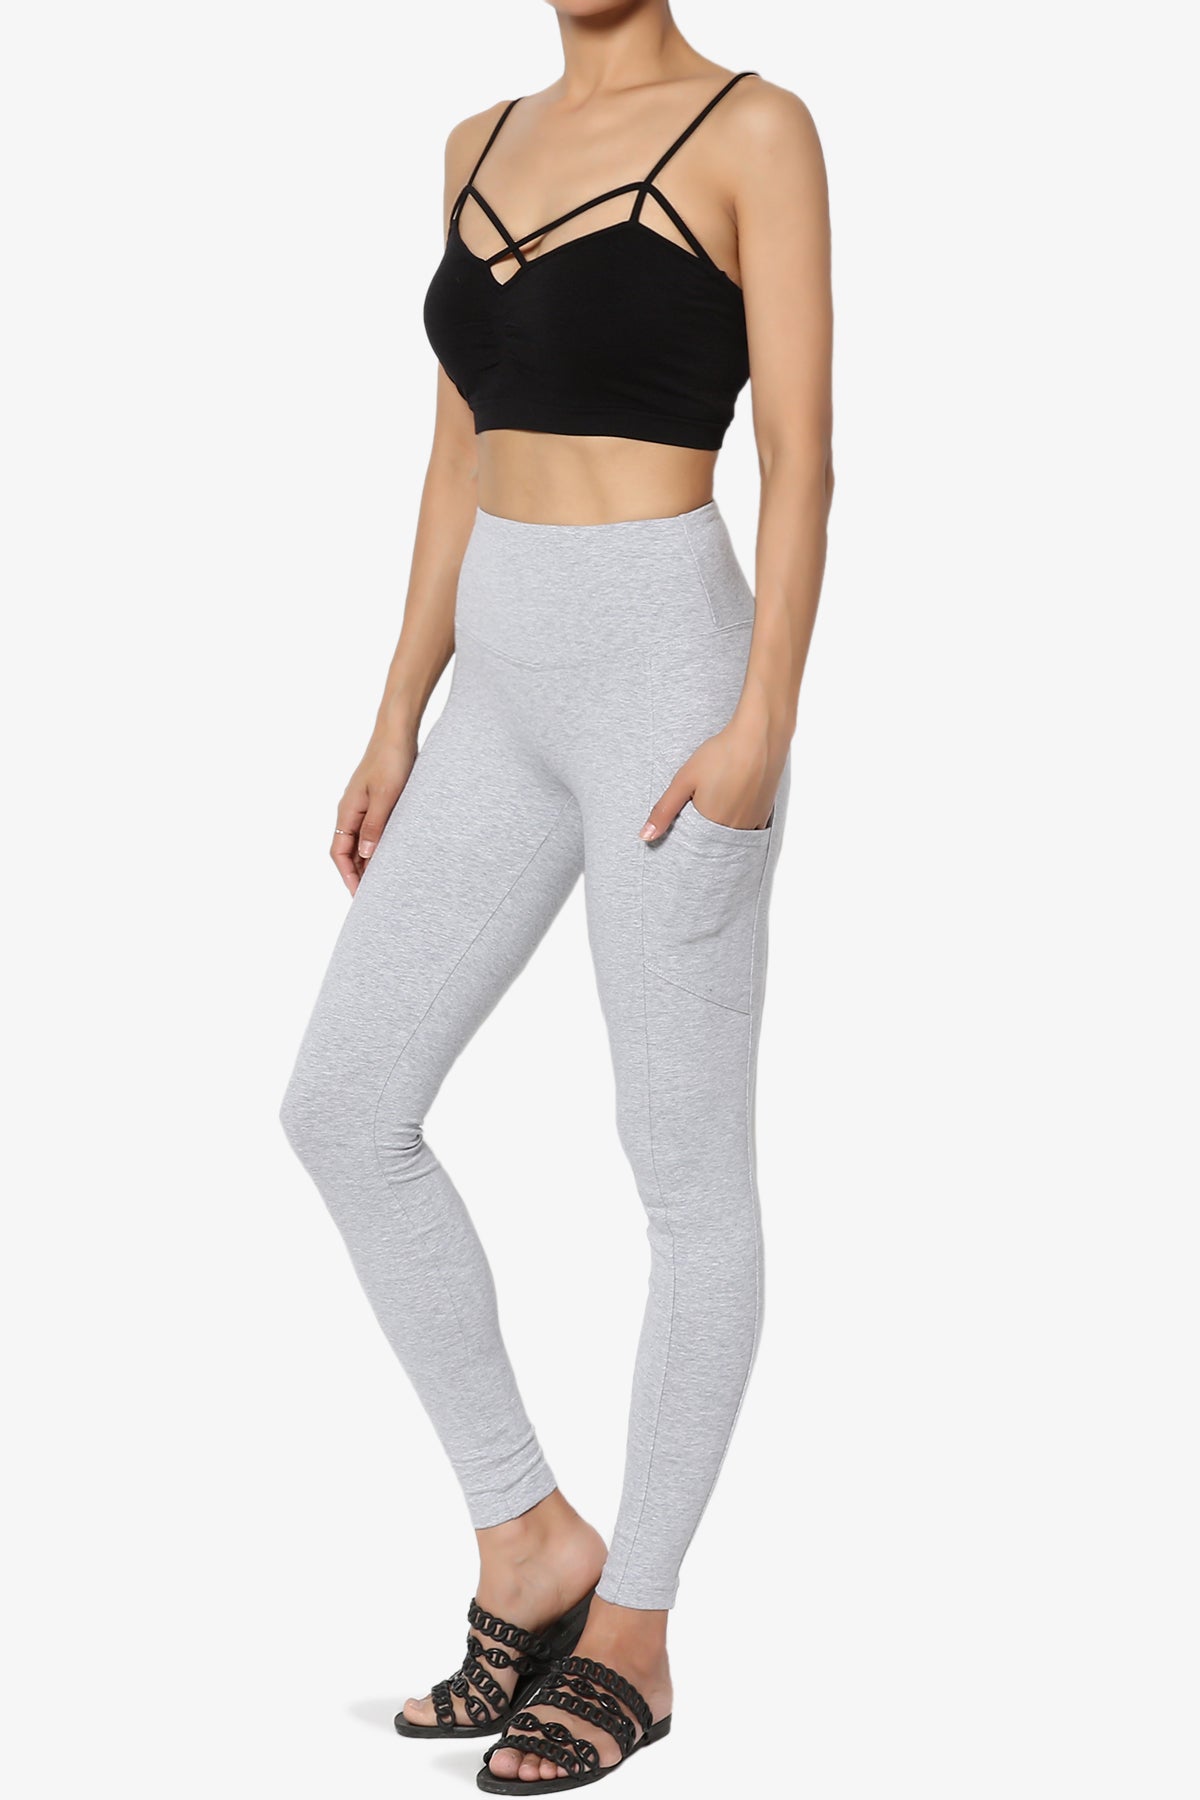 Ansley Luxe Cotton Leggings with Pockets HEATHER GREY_6